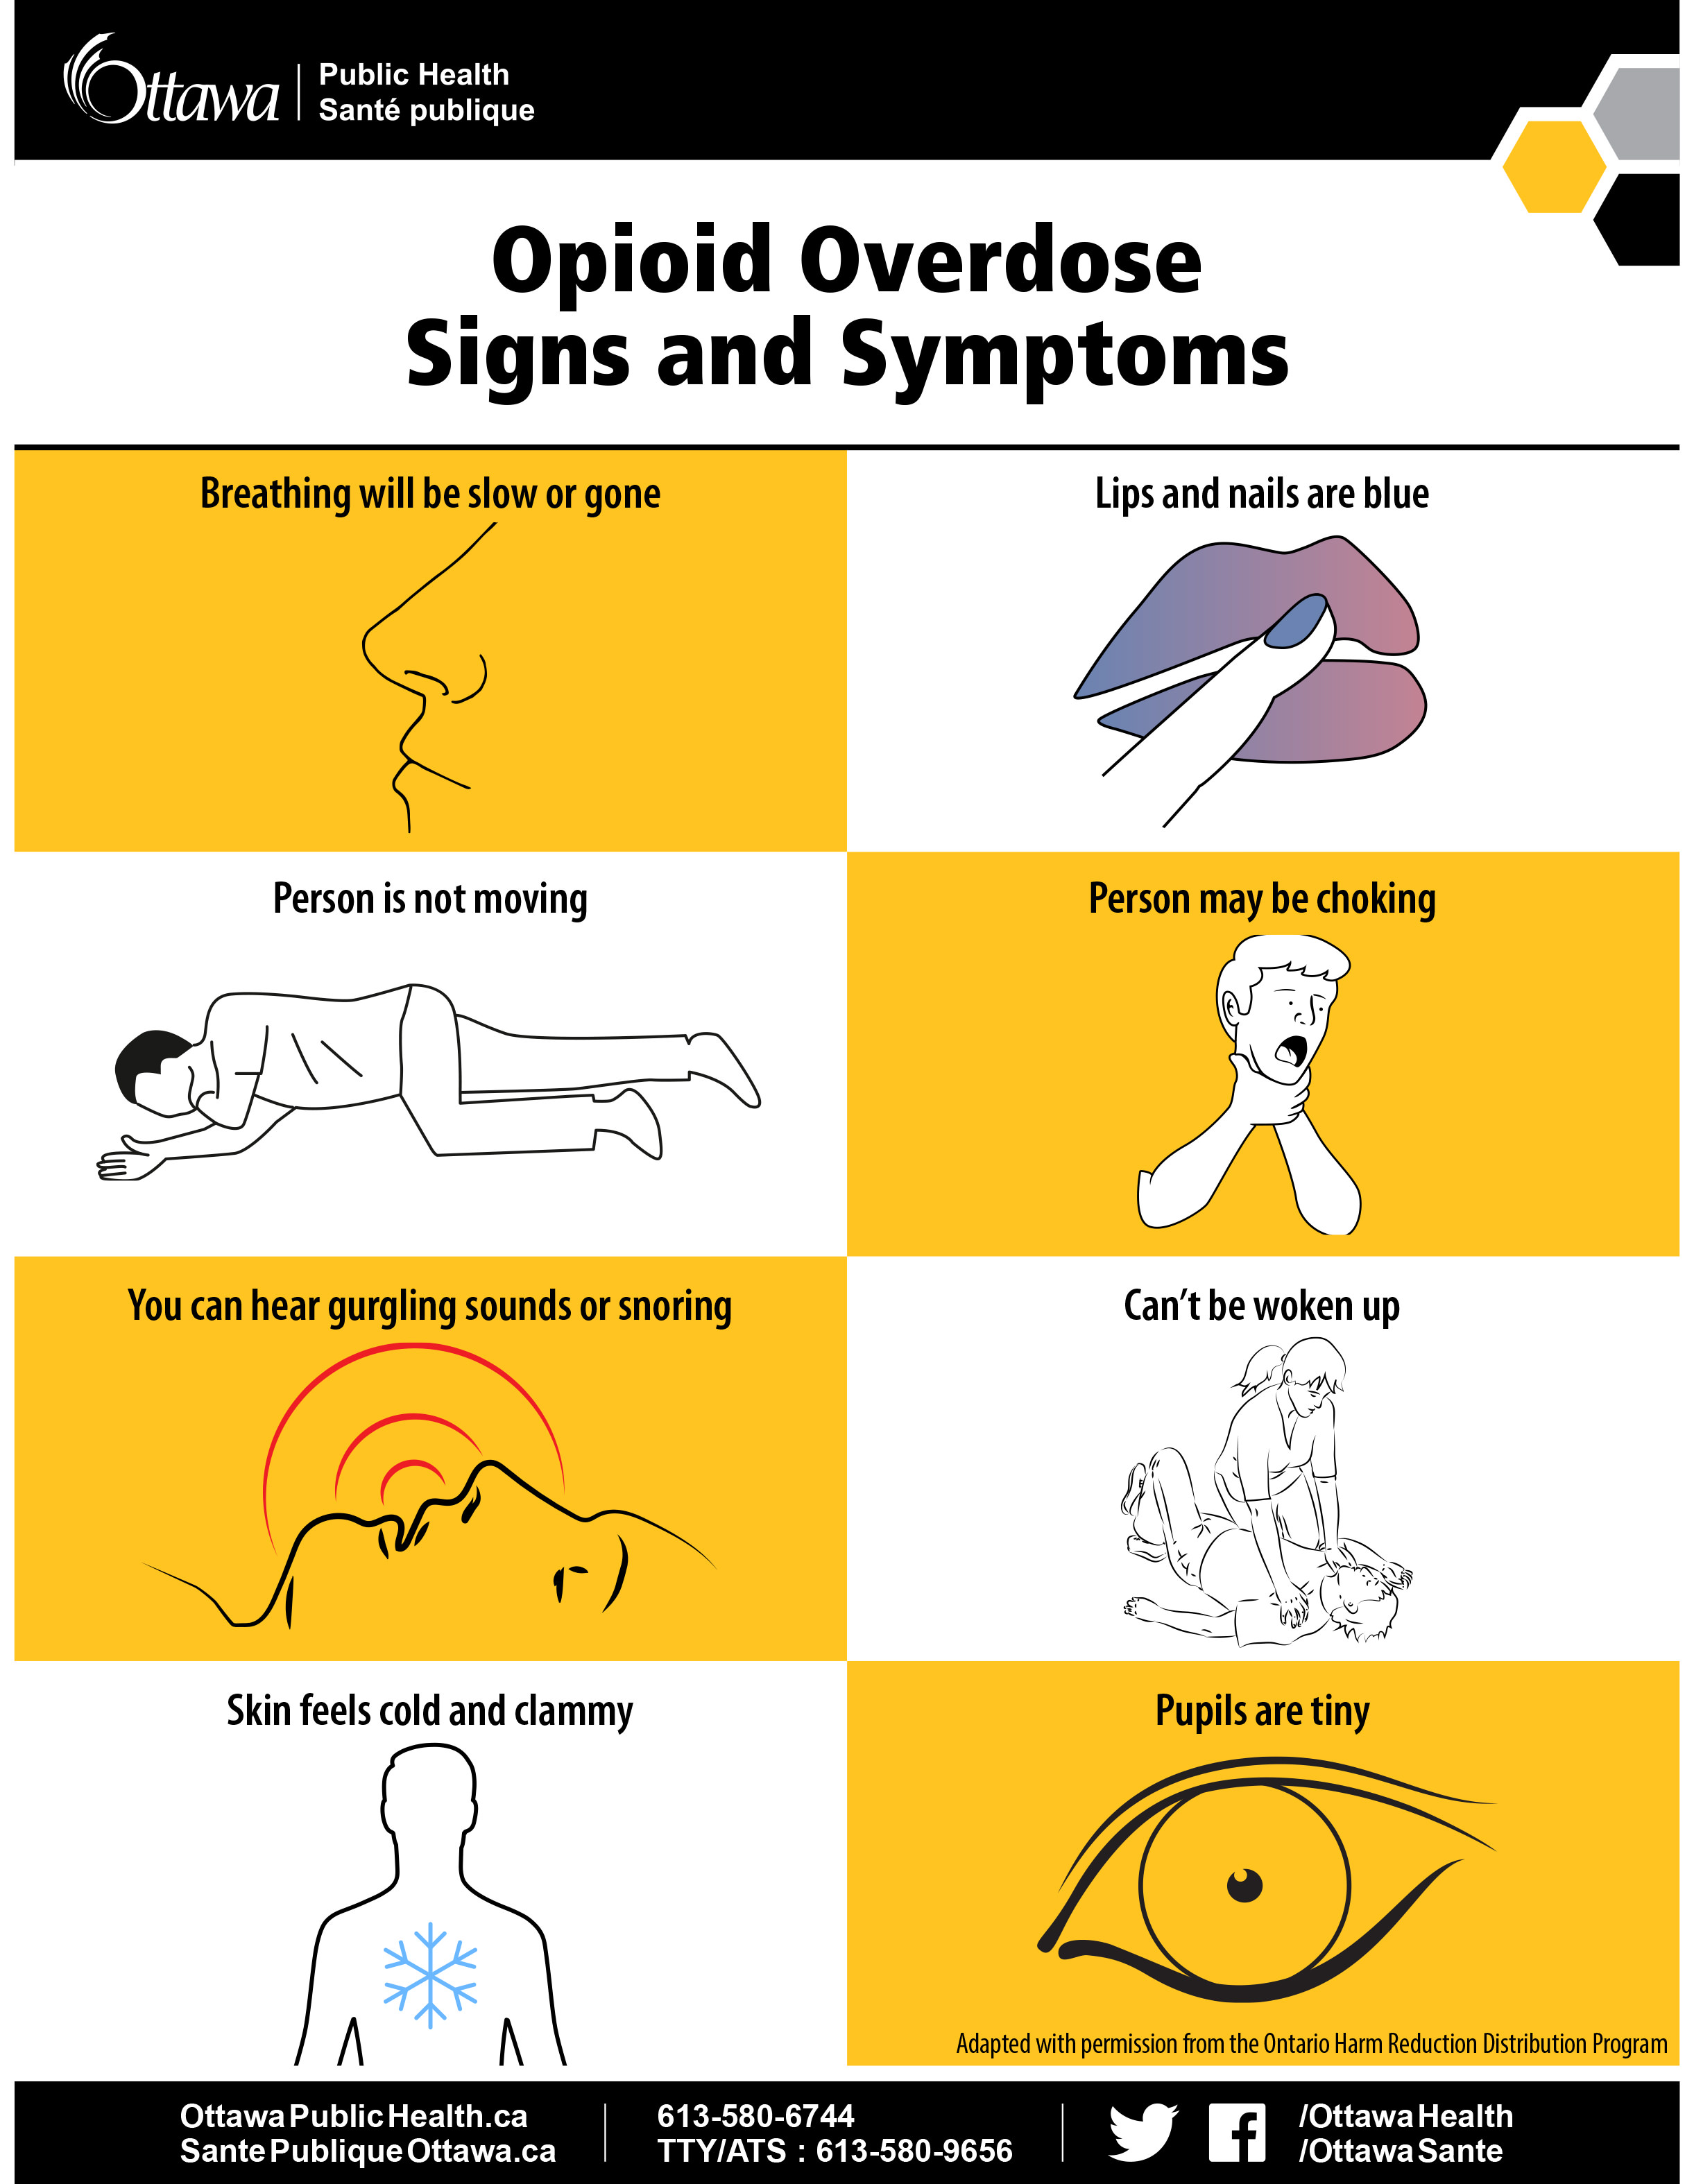 Opioid Overdose Signs and Symptoms